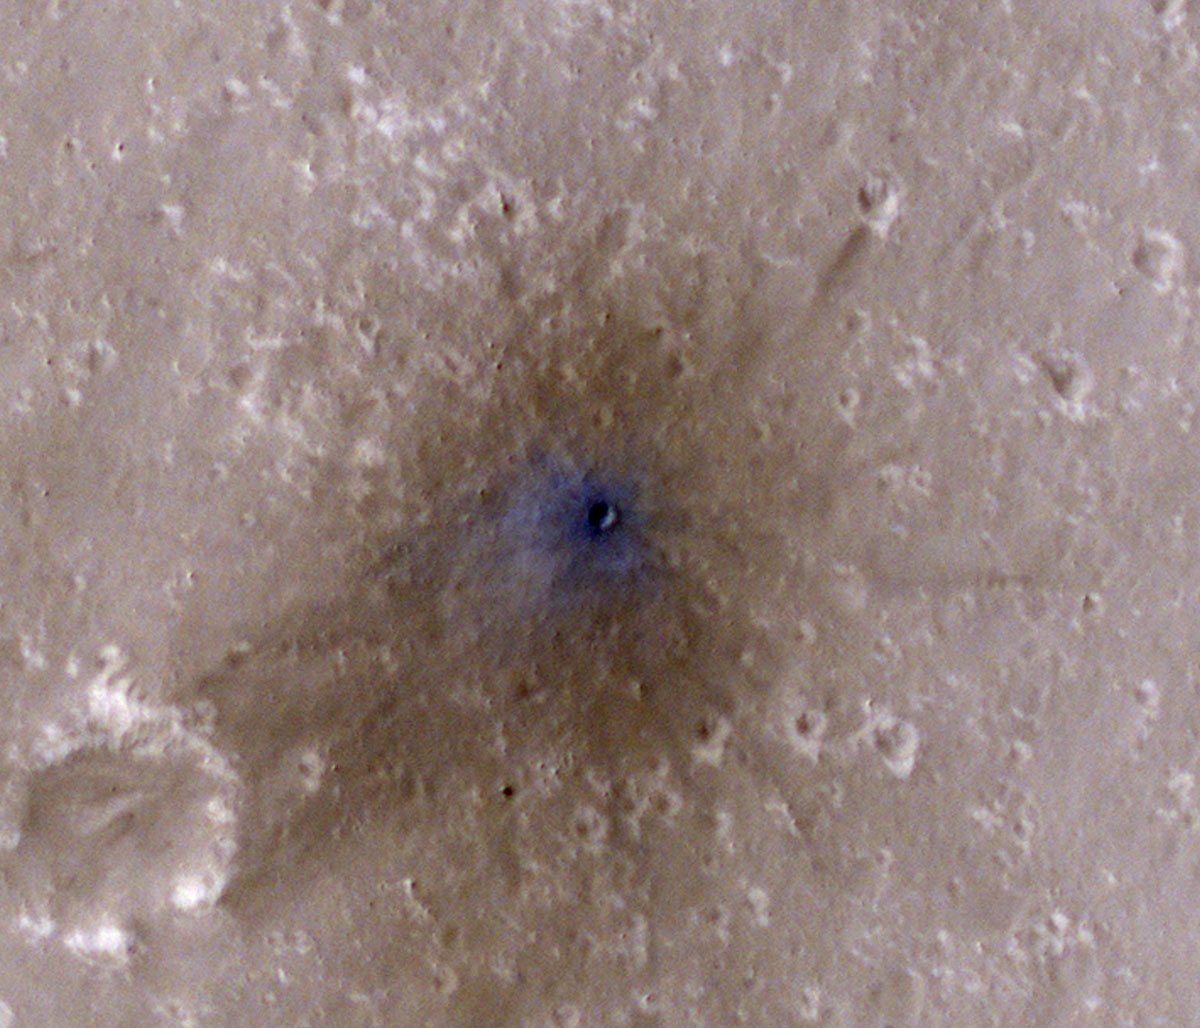 detected by the agency’s InSight lander using its seismometer. This crater was formed on Feb. 18, 2021.